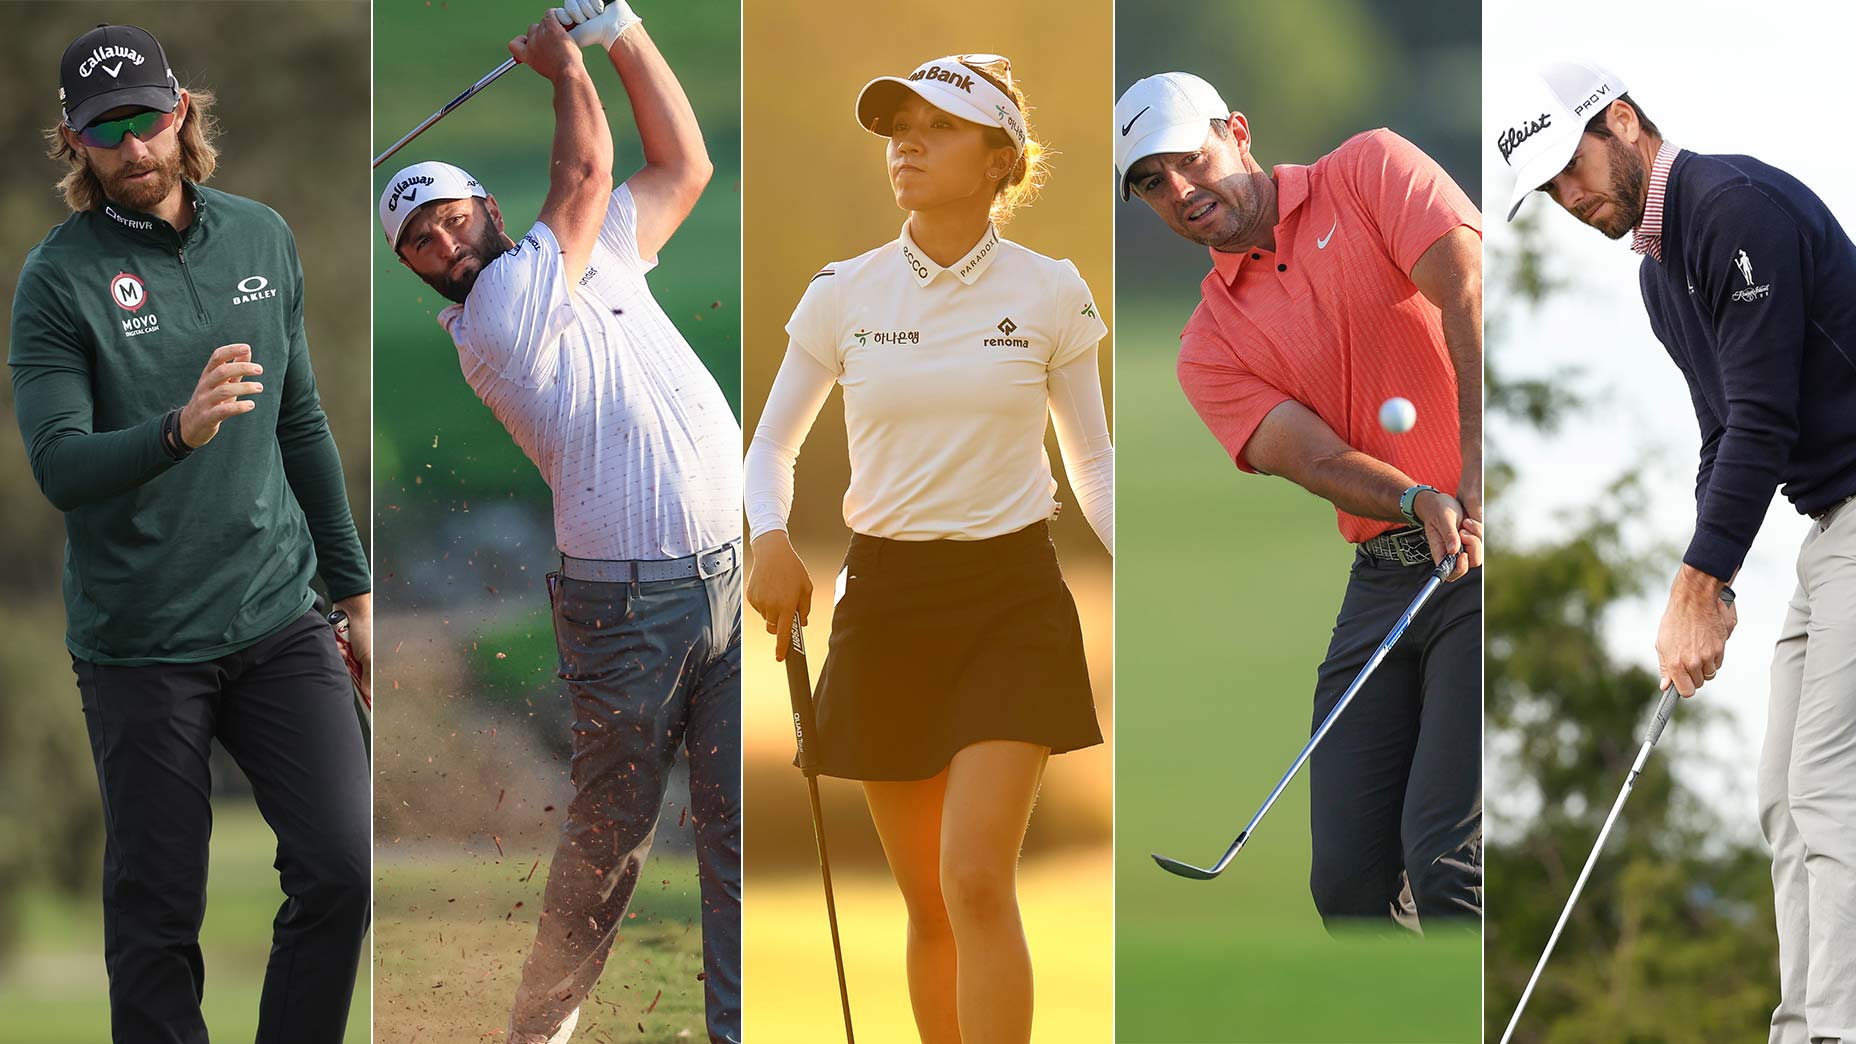 Salme Sige Mudret Here's what's at stake as PGA, DP World and LPGA Tours all close out 2022